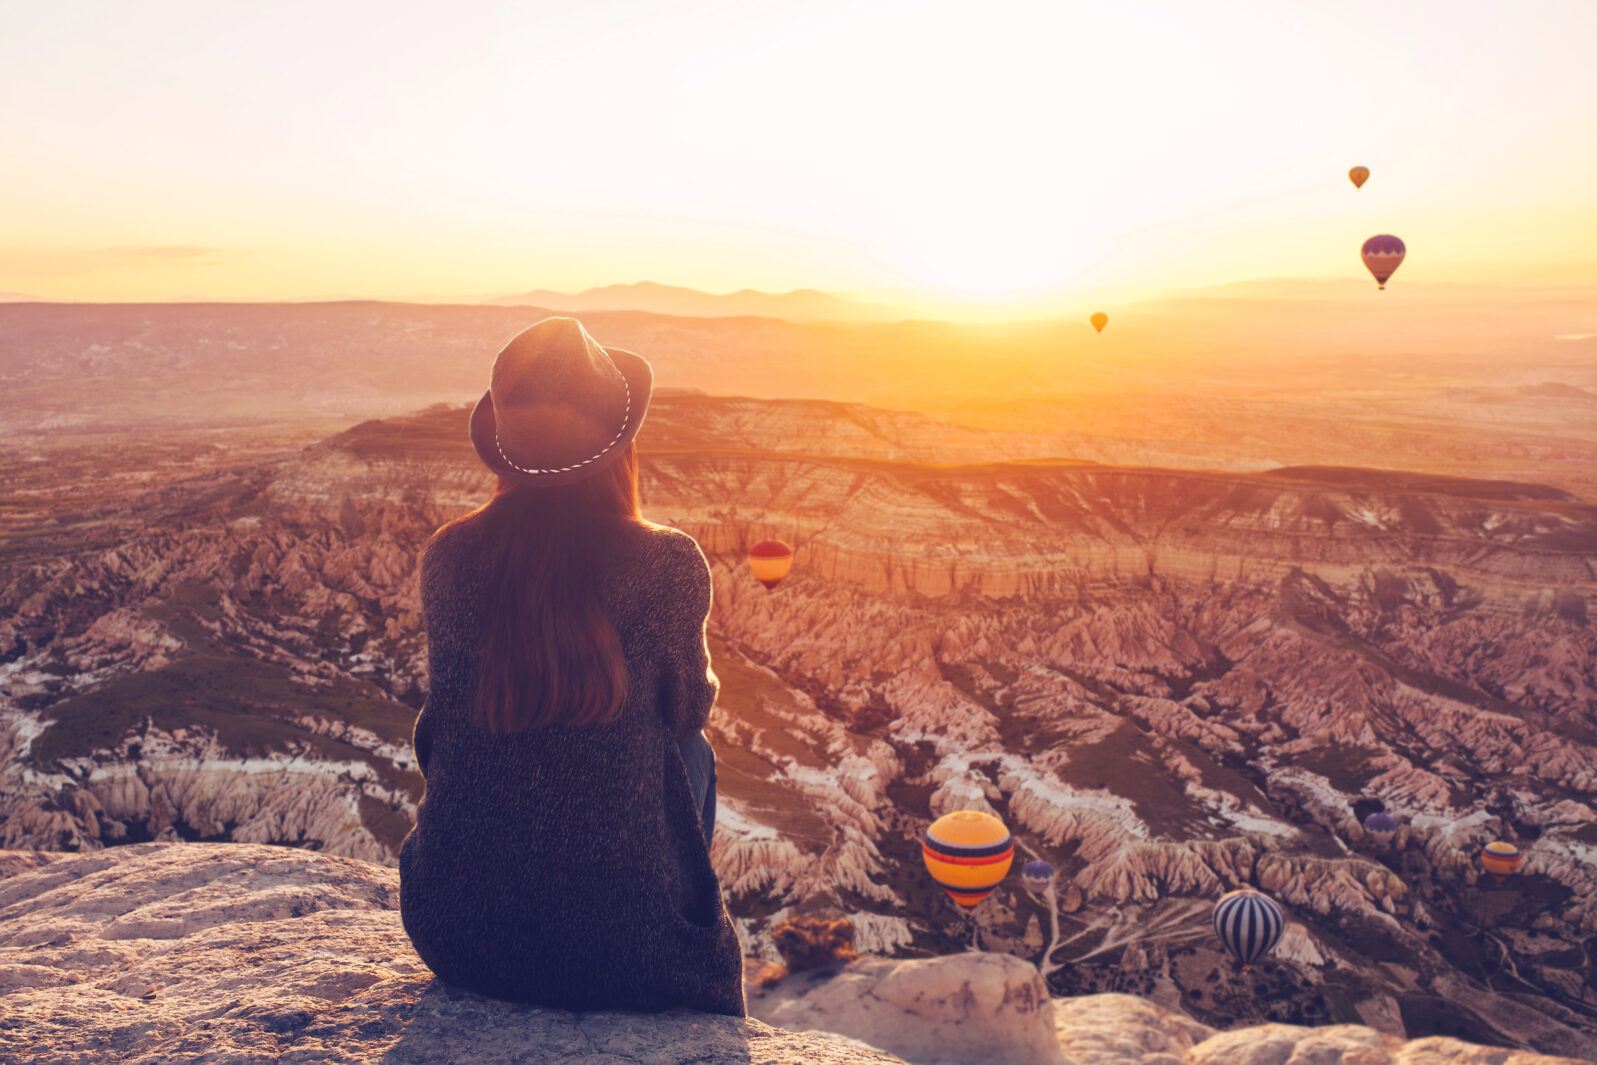 A girl in a hat on top of a hill in silence and loneliness admires the calm natural landscape and balloons.